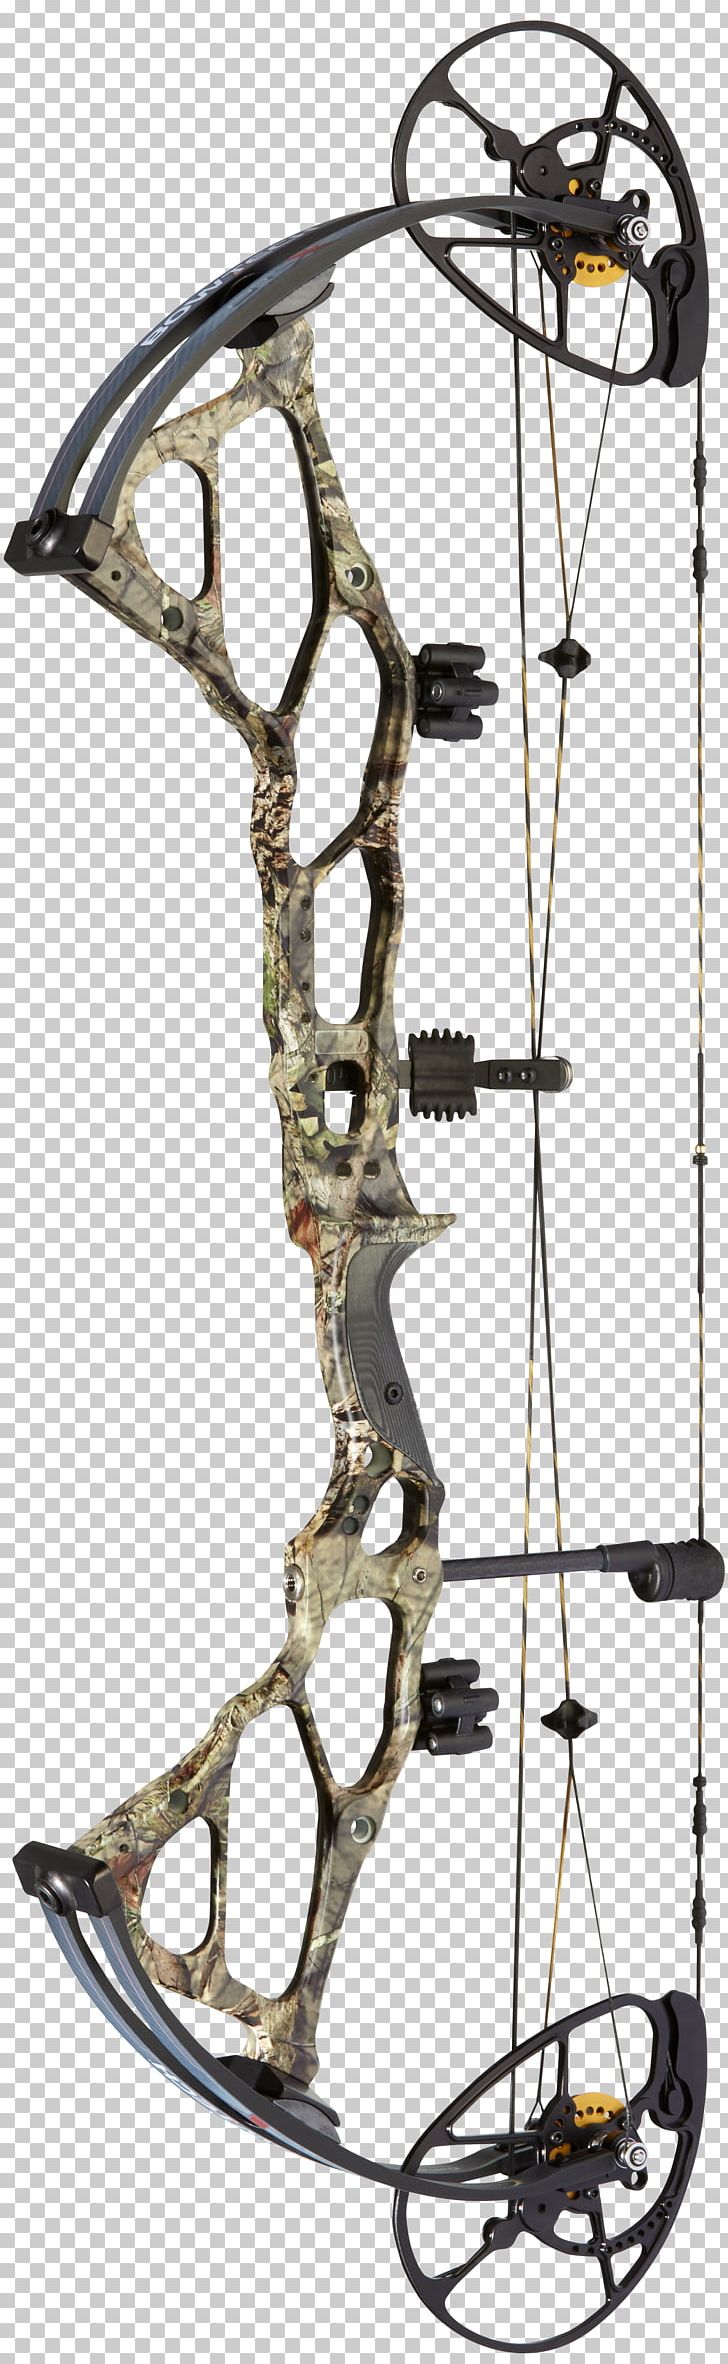 Compound Bows Bow And Arrow Binary Cam BowTech Archery PNG, Clipart, Archery, Binary Cam, Bow, Bow And Arrow, Bowhunting Free PNG Download